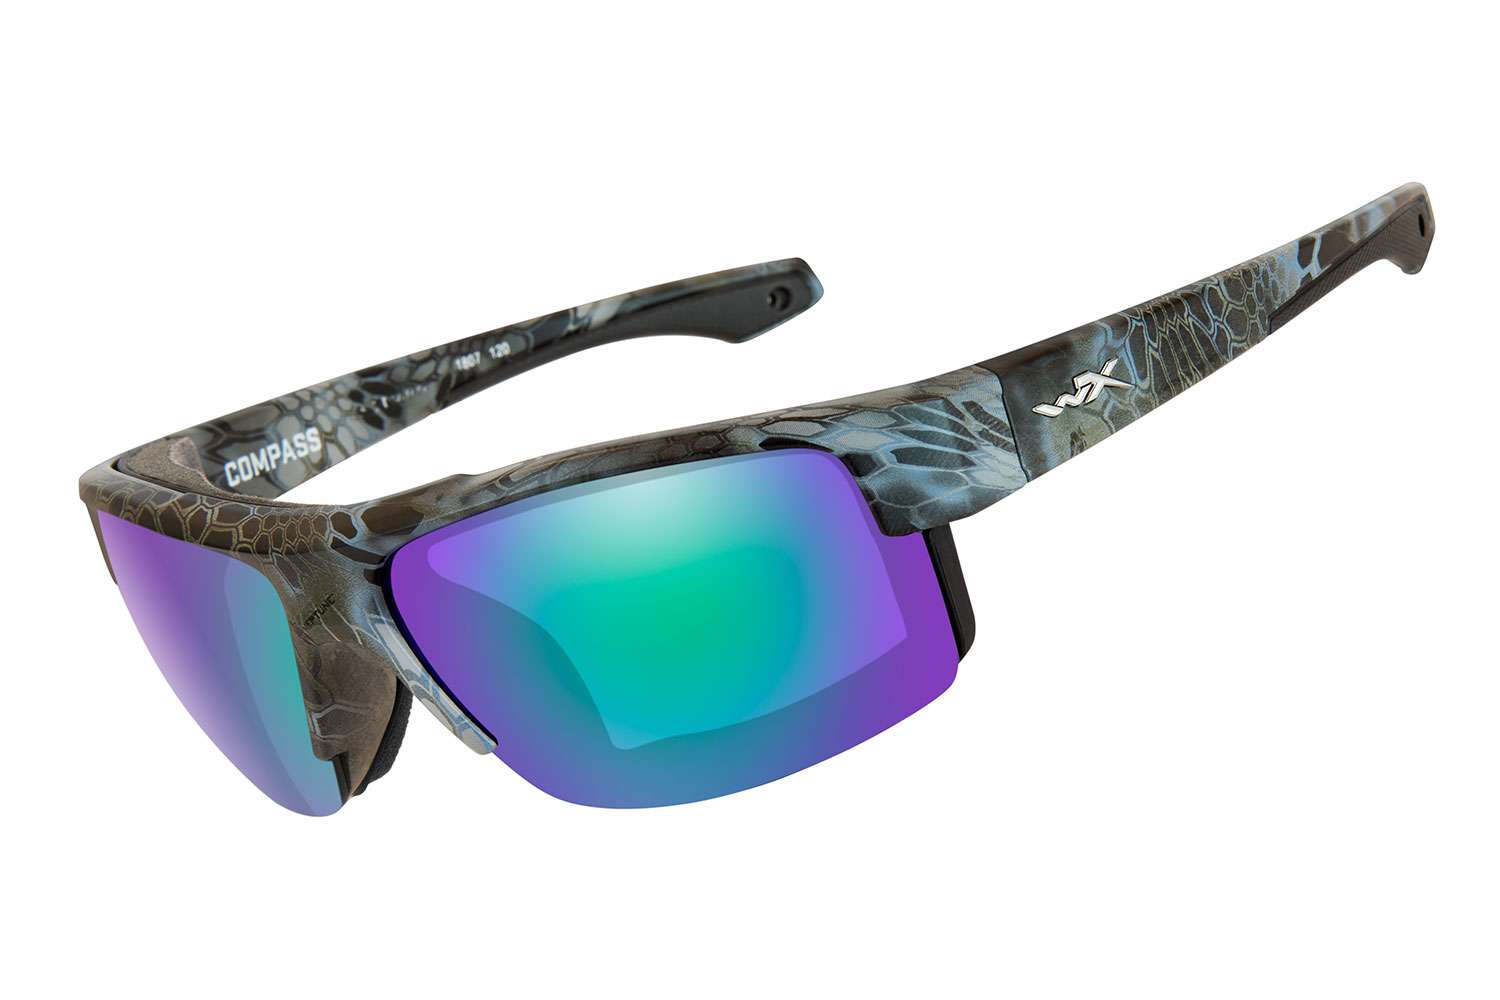     <B>Wiley X Compass</B>
<BR>New for 2019, the Wiley X Compass combines everything they stand for into a stylish pair of shades that are an anglerâs dream come true. The sunglasses feature a unique high-wrap, half-frame design equipped with Wiley Xâs ever-popular Removable Facial Cavity Seal. This perfect union blocks wind, dust, debris, and peripheral light from sneaking into the wearerâs site, while boosting color contrast, and high visual definition. The shatterproof Selenite polycarbonate polarized lenses are carefully designed and tested to meet stringent ANSI Z87.1 and EN standards, which ensures the highest level of protection and optical quality in the final product.
